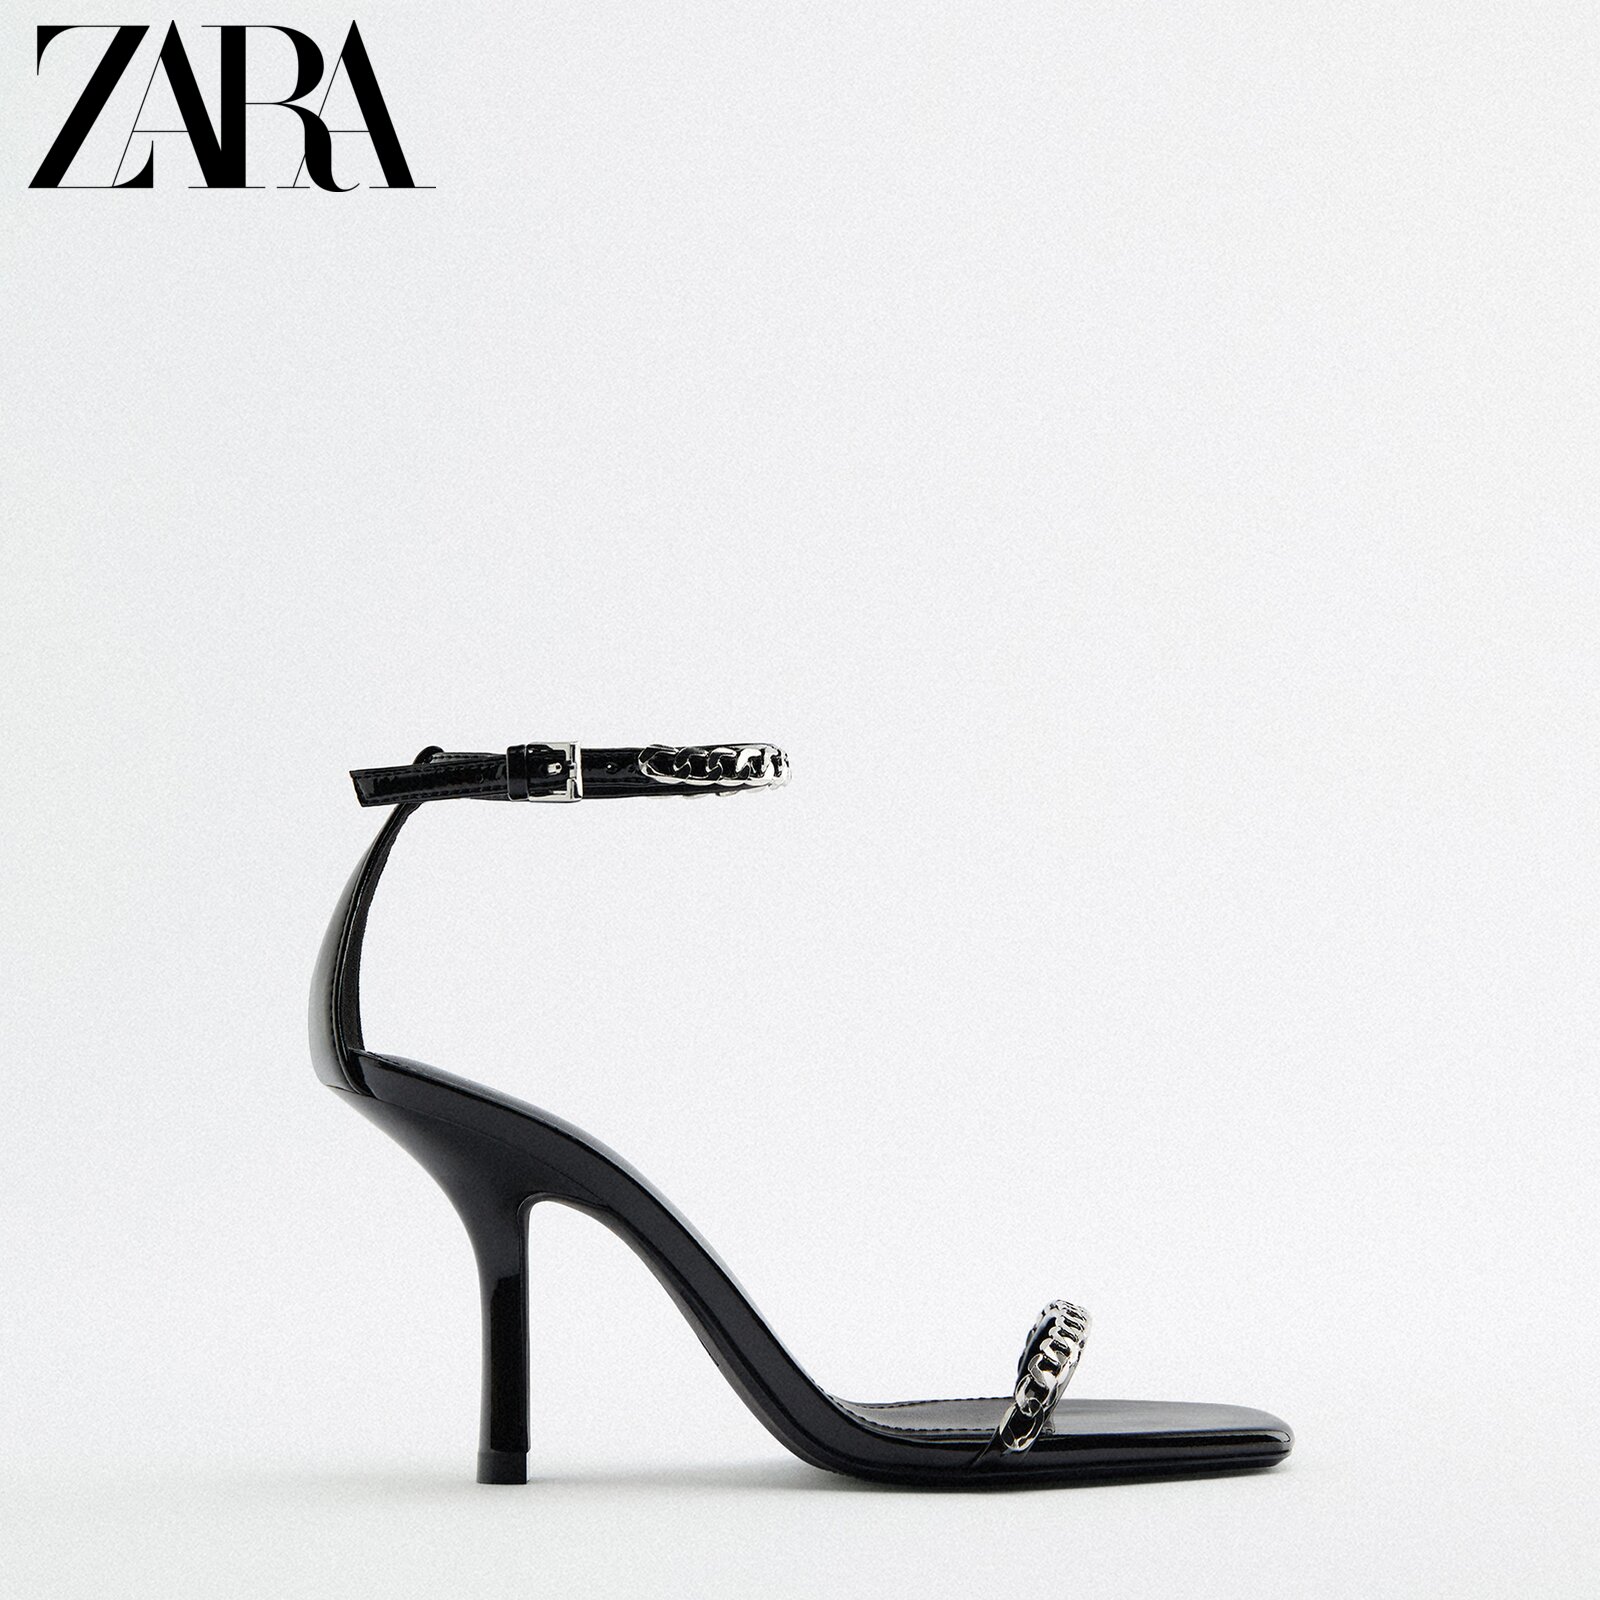 ZARA spring and summer new product women's shoes black chain decoration fashion high -heeled sandals 1364810 040